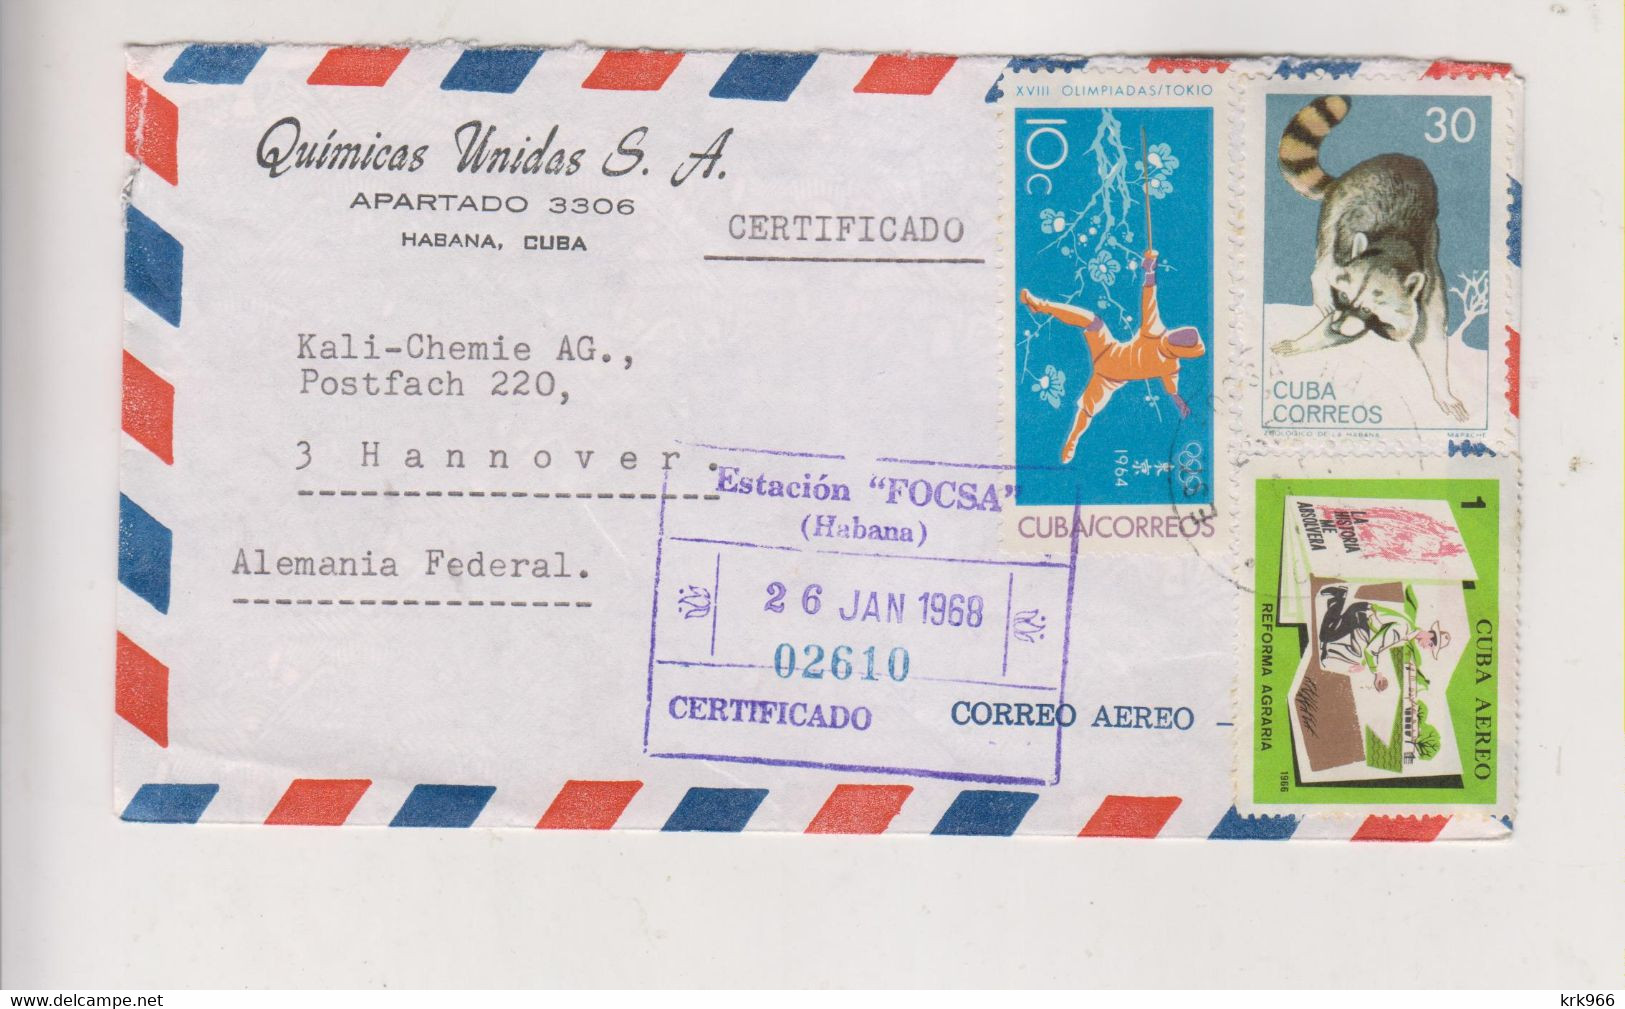 CUBA HAVANA HABANA 1968 Registered Airmail Cover To Germany - Covers & Documents